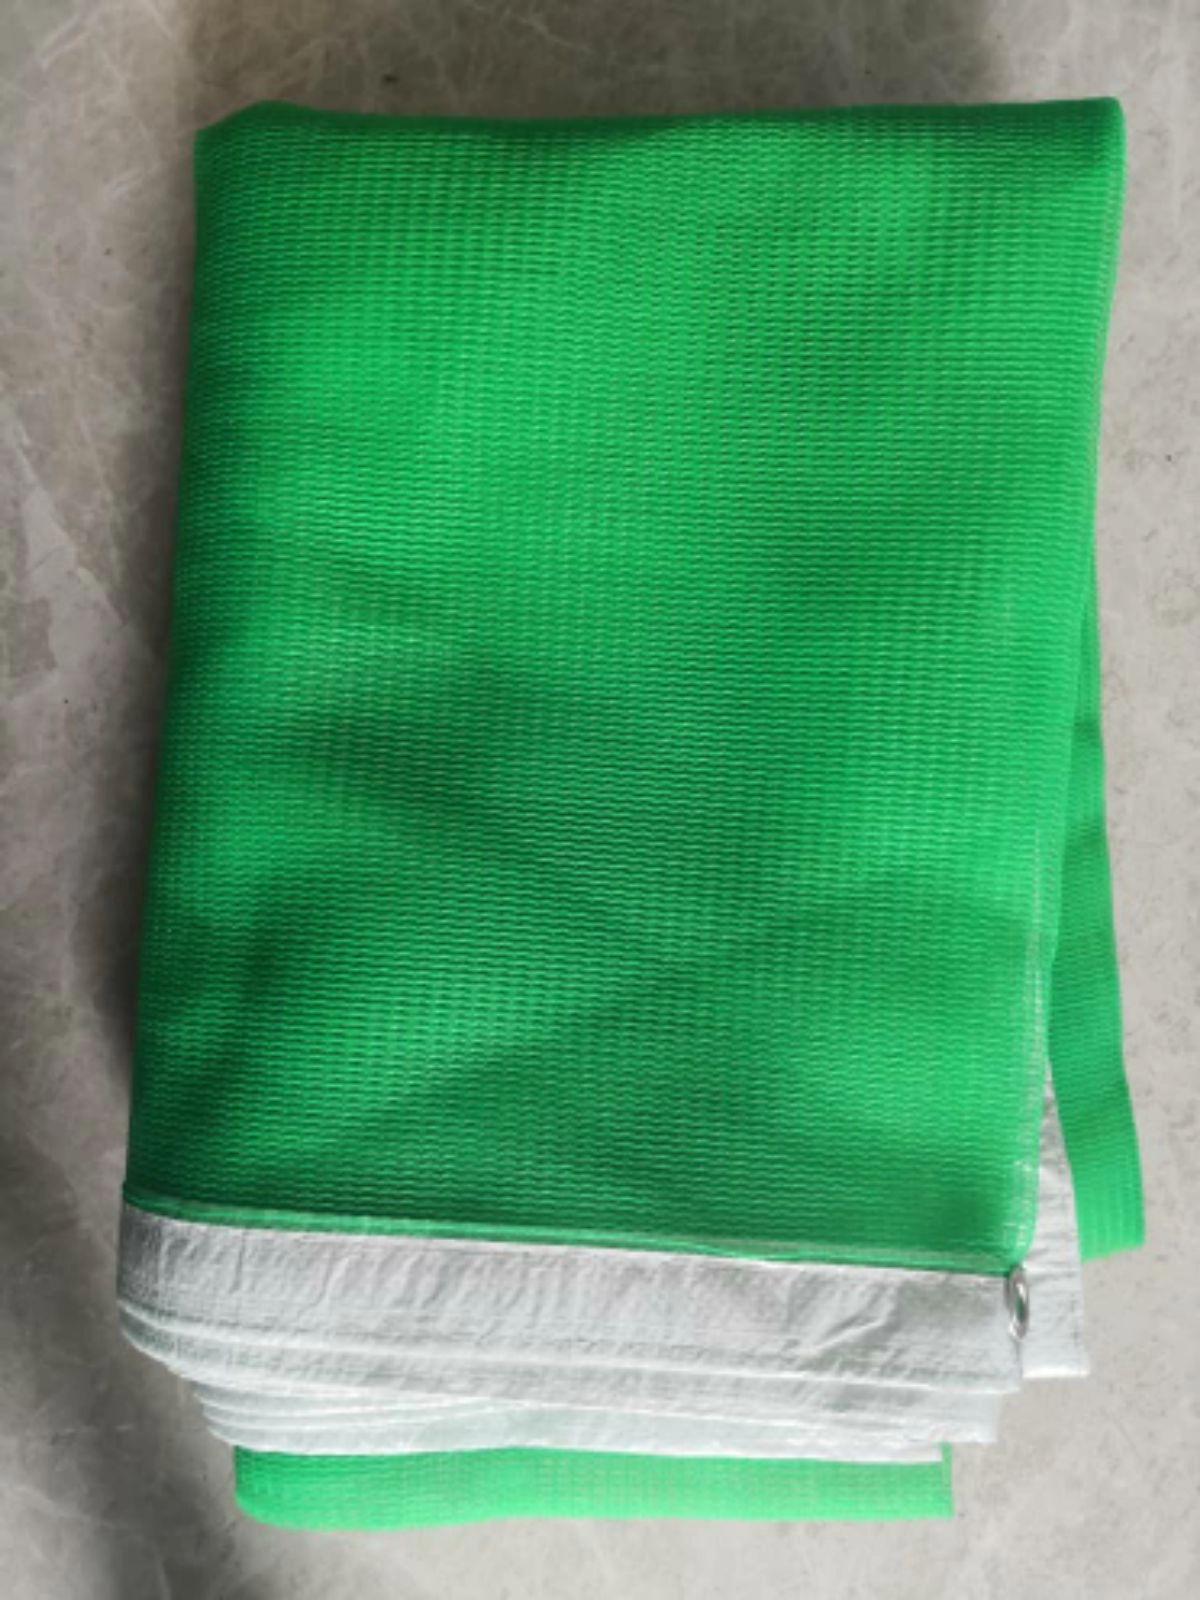 Green safety Netting